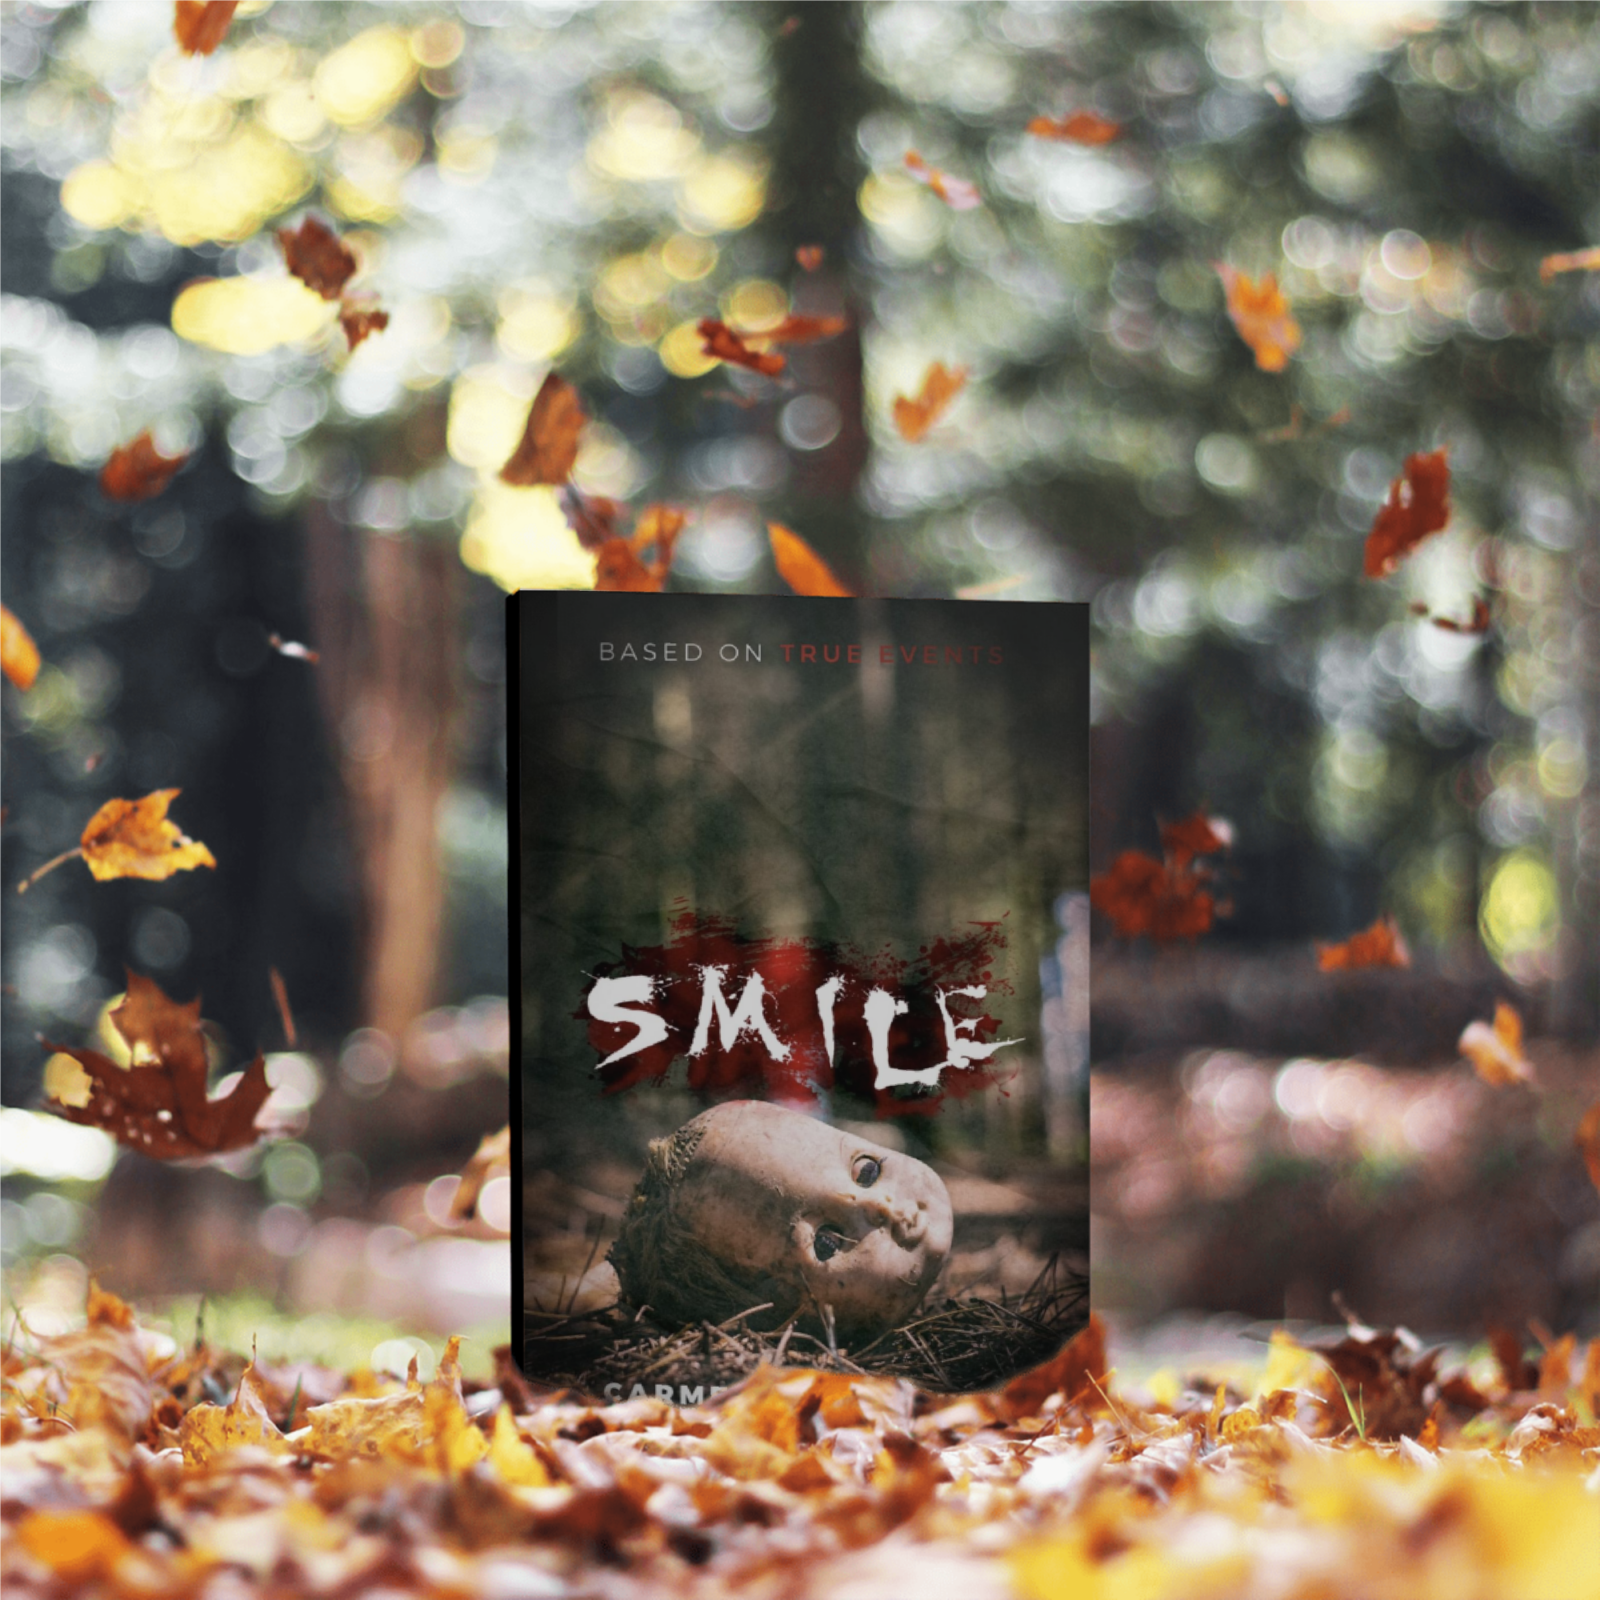 DC Officer and Author, Carmelo Rodriguez Set to Release New Novel, "Smile" on Halloween